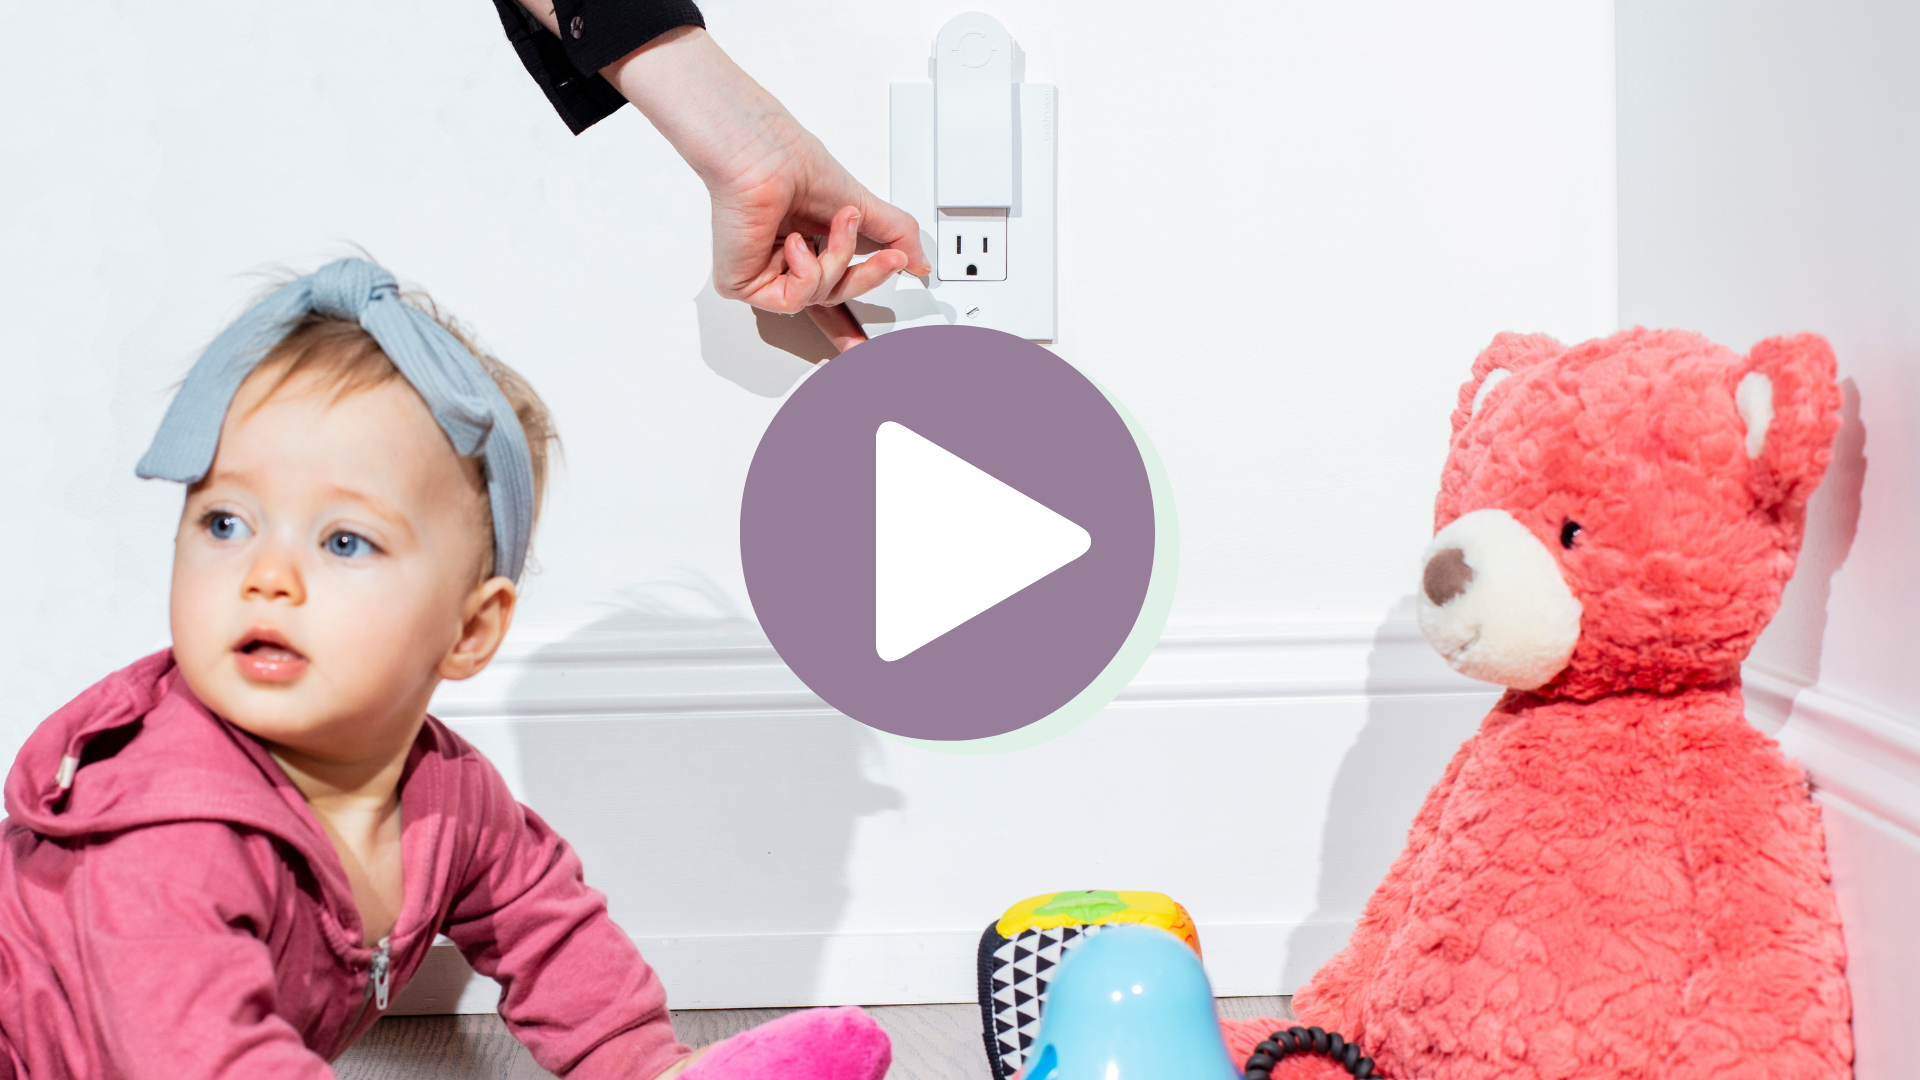 Load video: introduction to Shut Your Face outlet covers